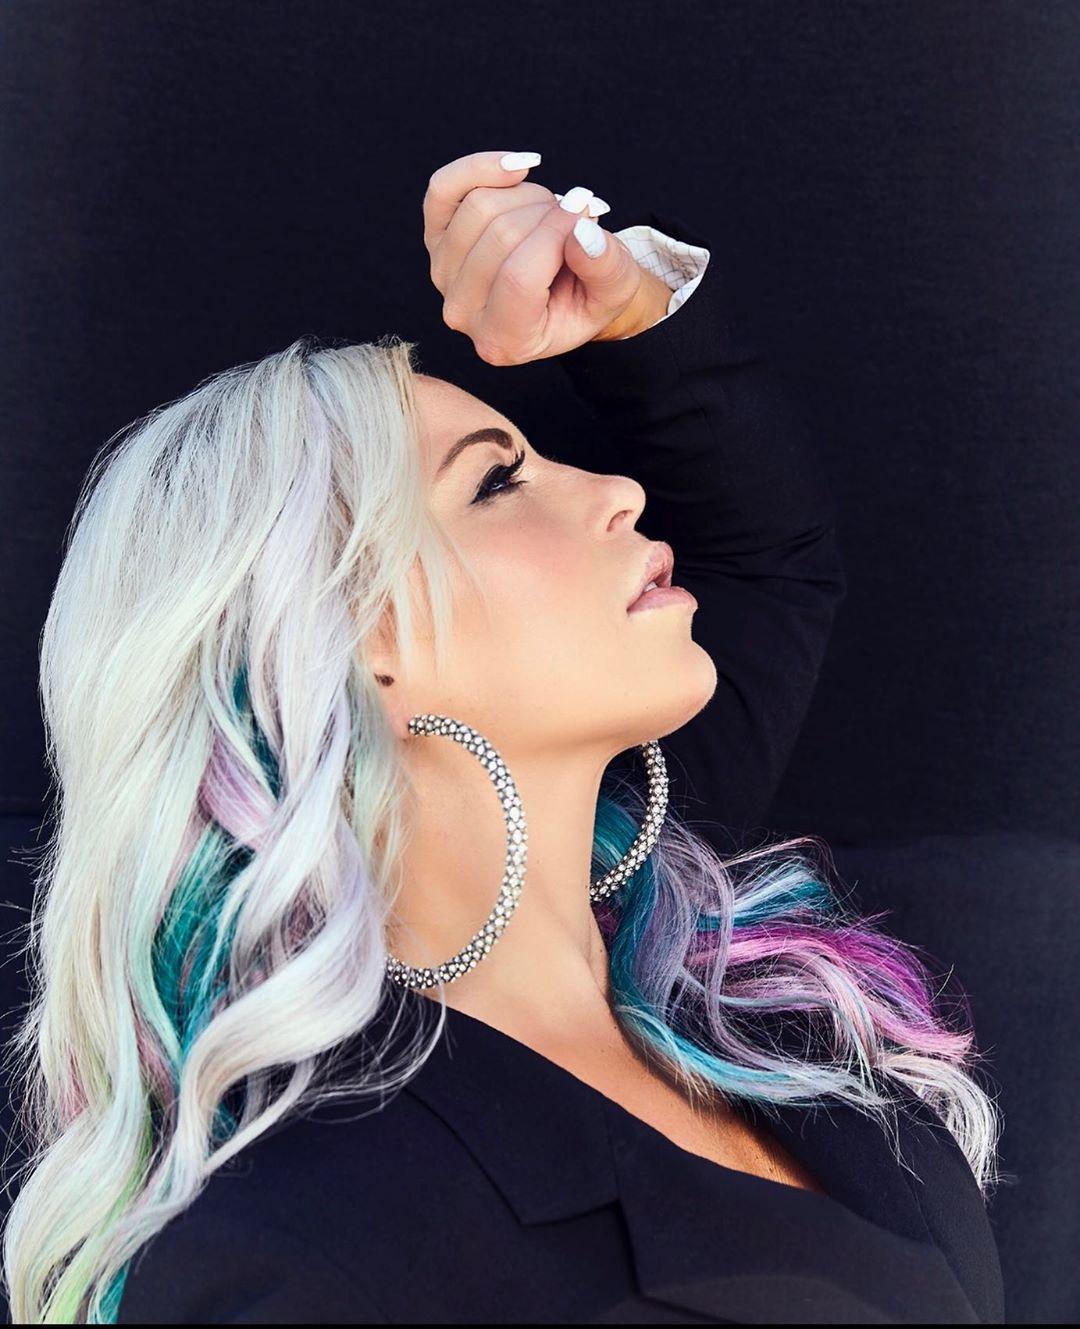 70+ Hot Pictures Of Dana Brooke Show Off This WWE Diva’s Sexy Body 14